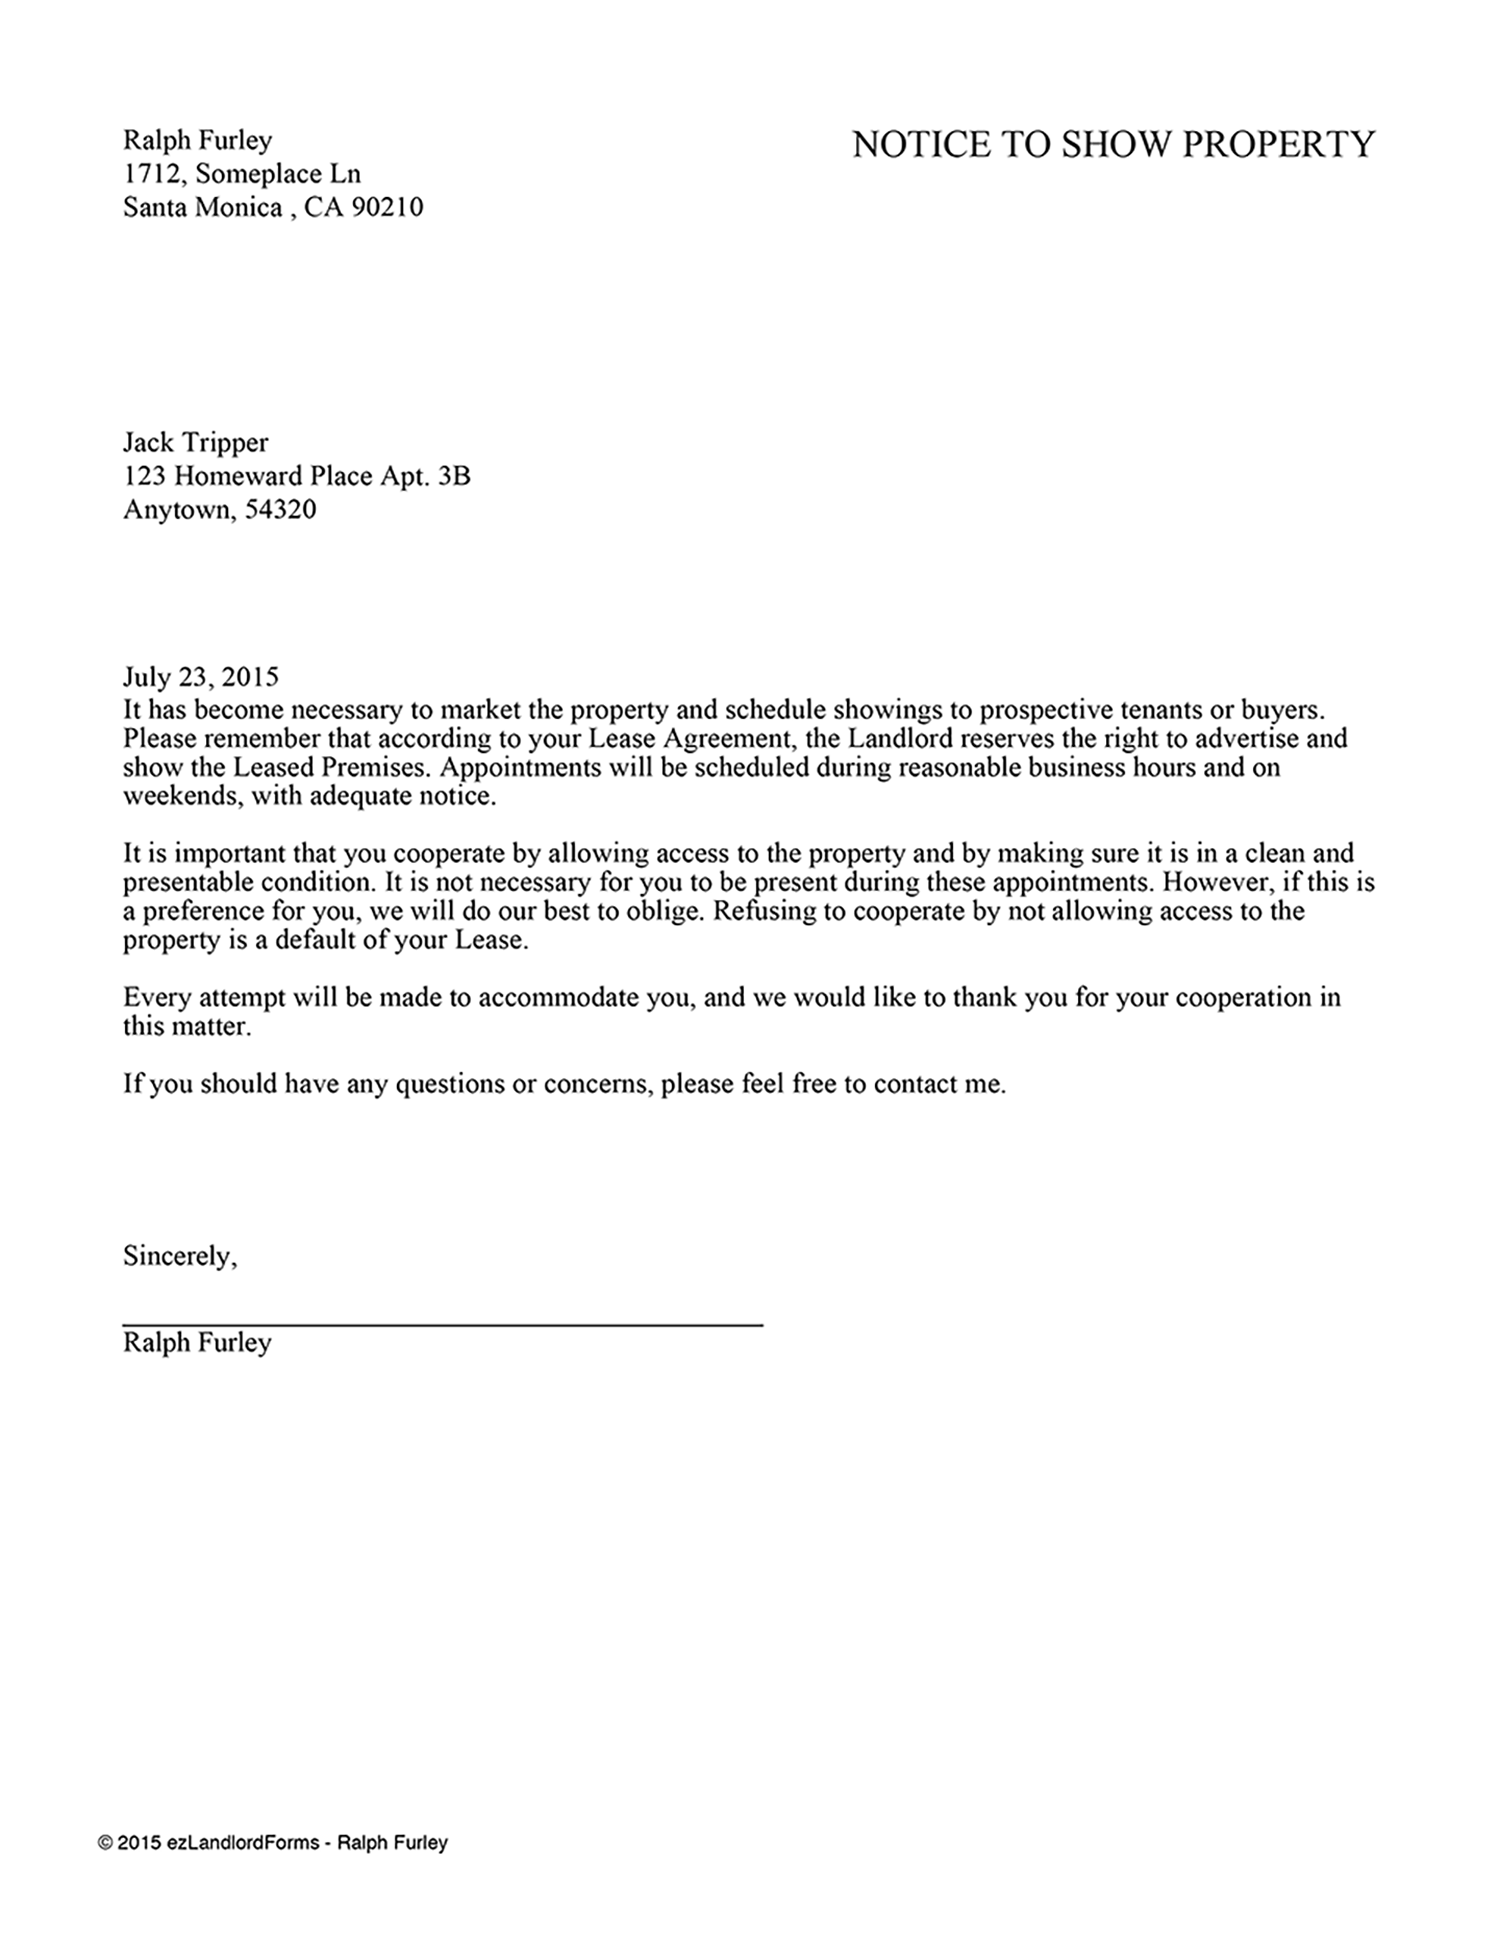 Lease Renewal Letter To Landlord from www.ezlandlordforms.com